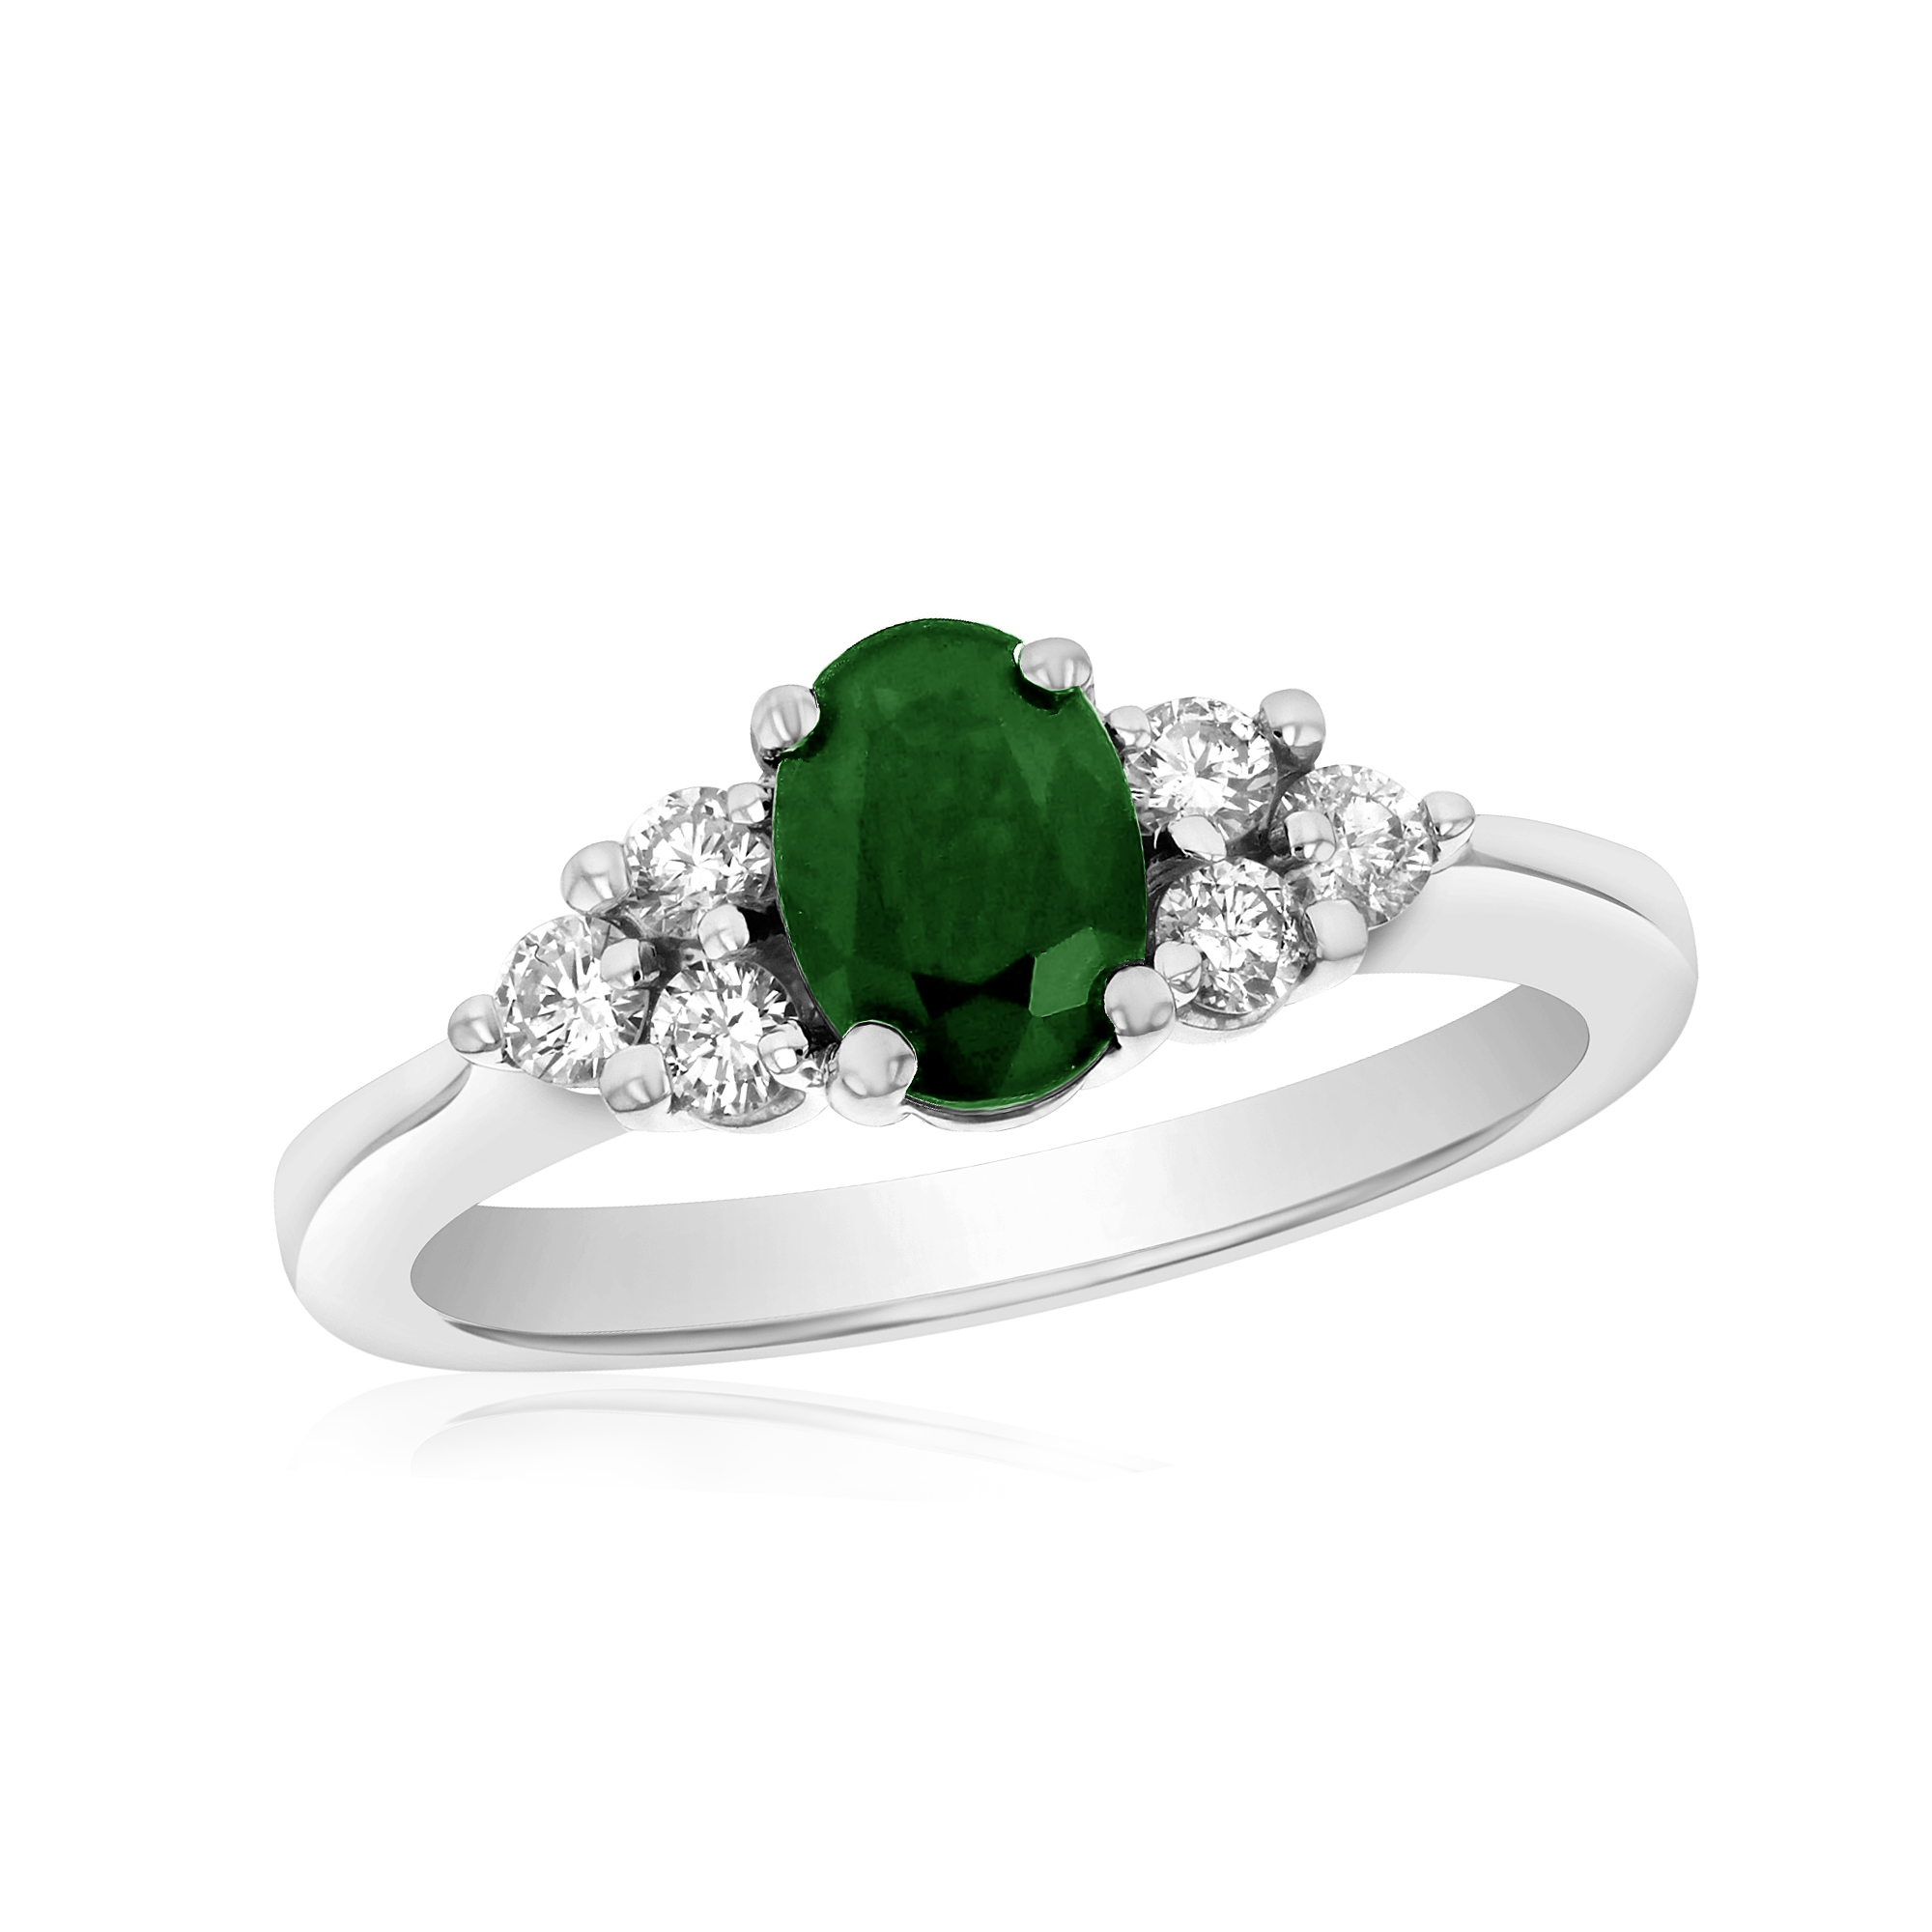 View 0.30ctw Diamond and Emerald Ring in 14k Gold